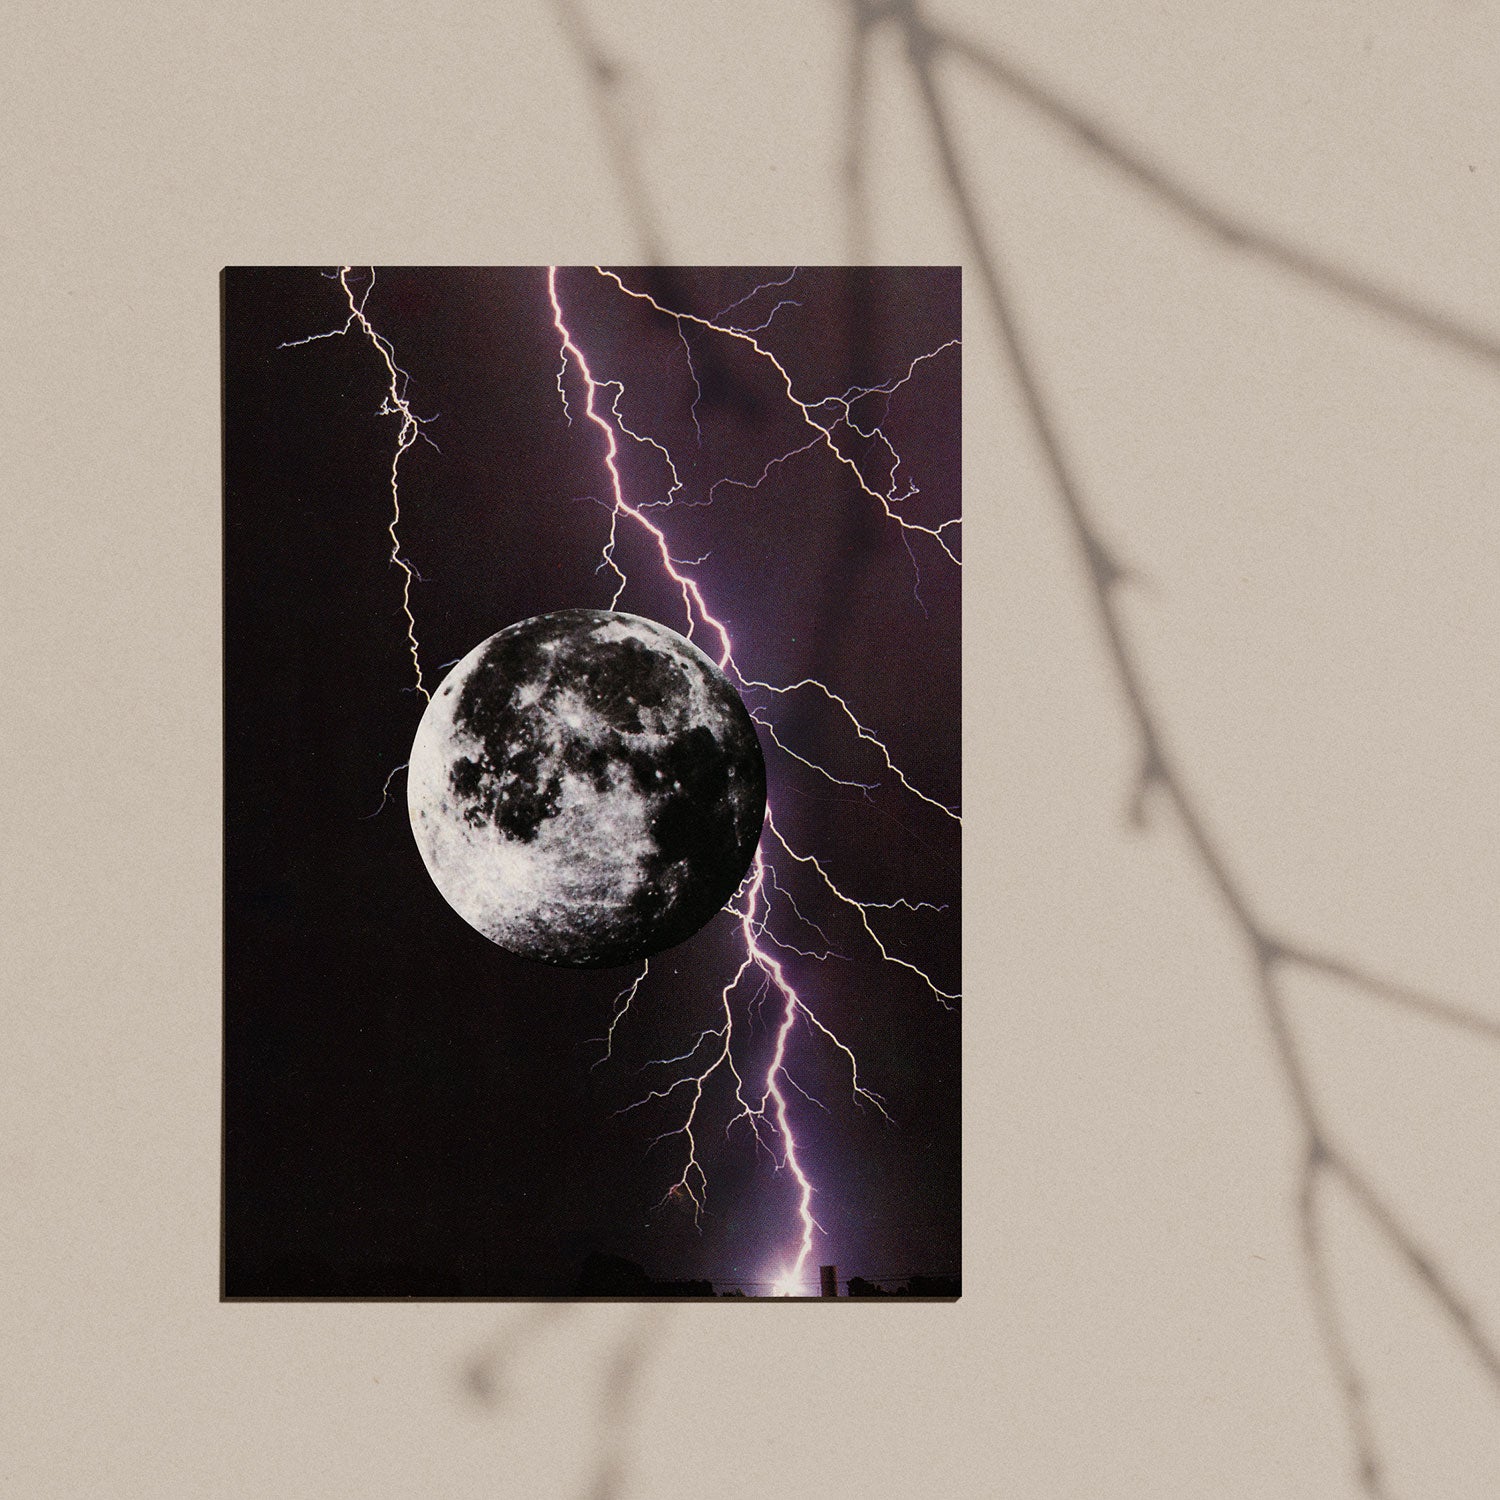 Lunar Lightning collage archival giclee photo print